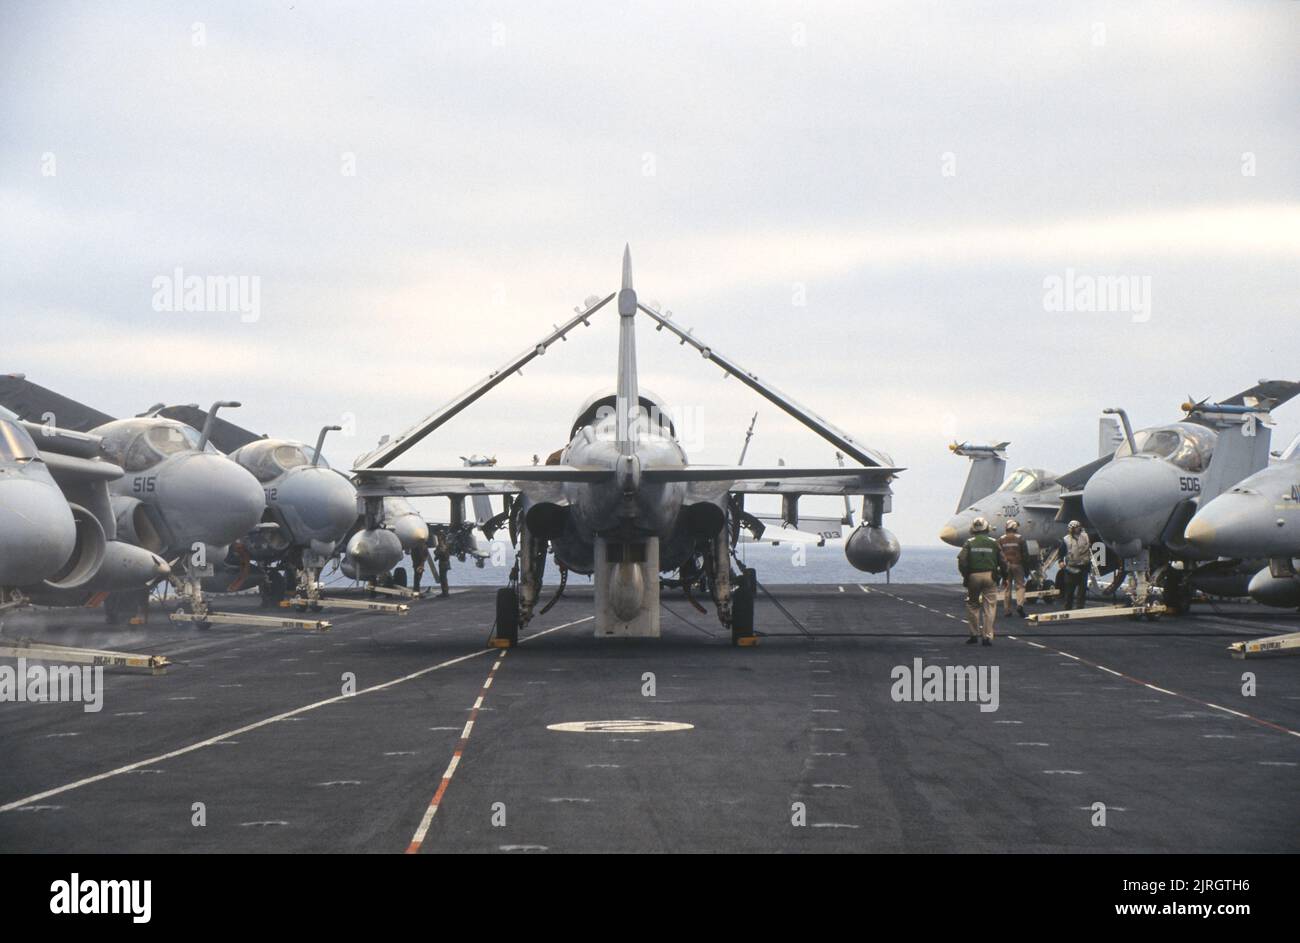 Grumman A-6 Intruders tied down on the bow of an aircraft carrier underway at sea Stock Photo